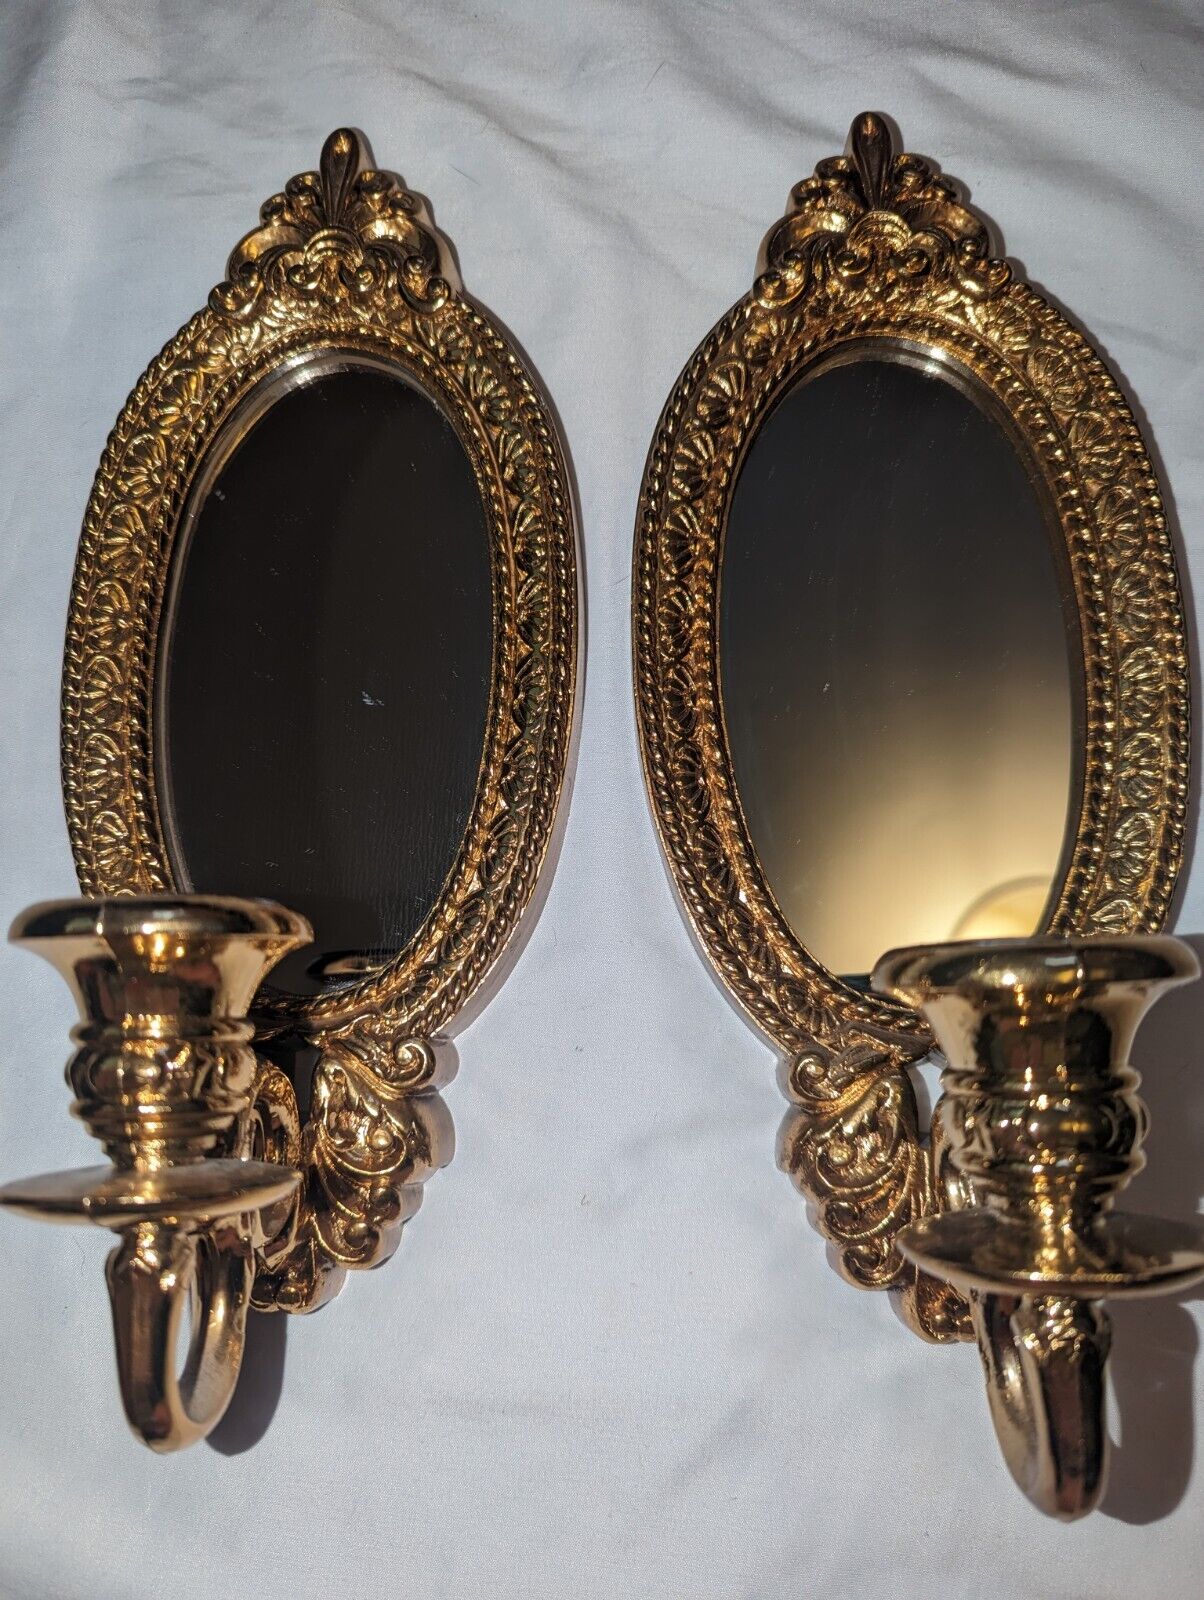 2 Vtg Gold Home Interiors Mirrored Wall Sconce Candle Holder Hollywood Regency